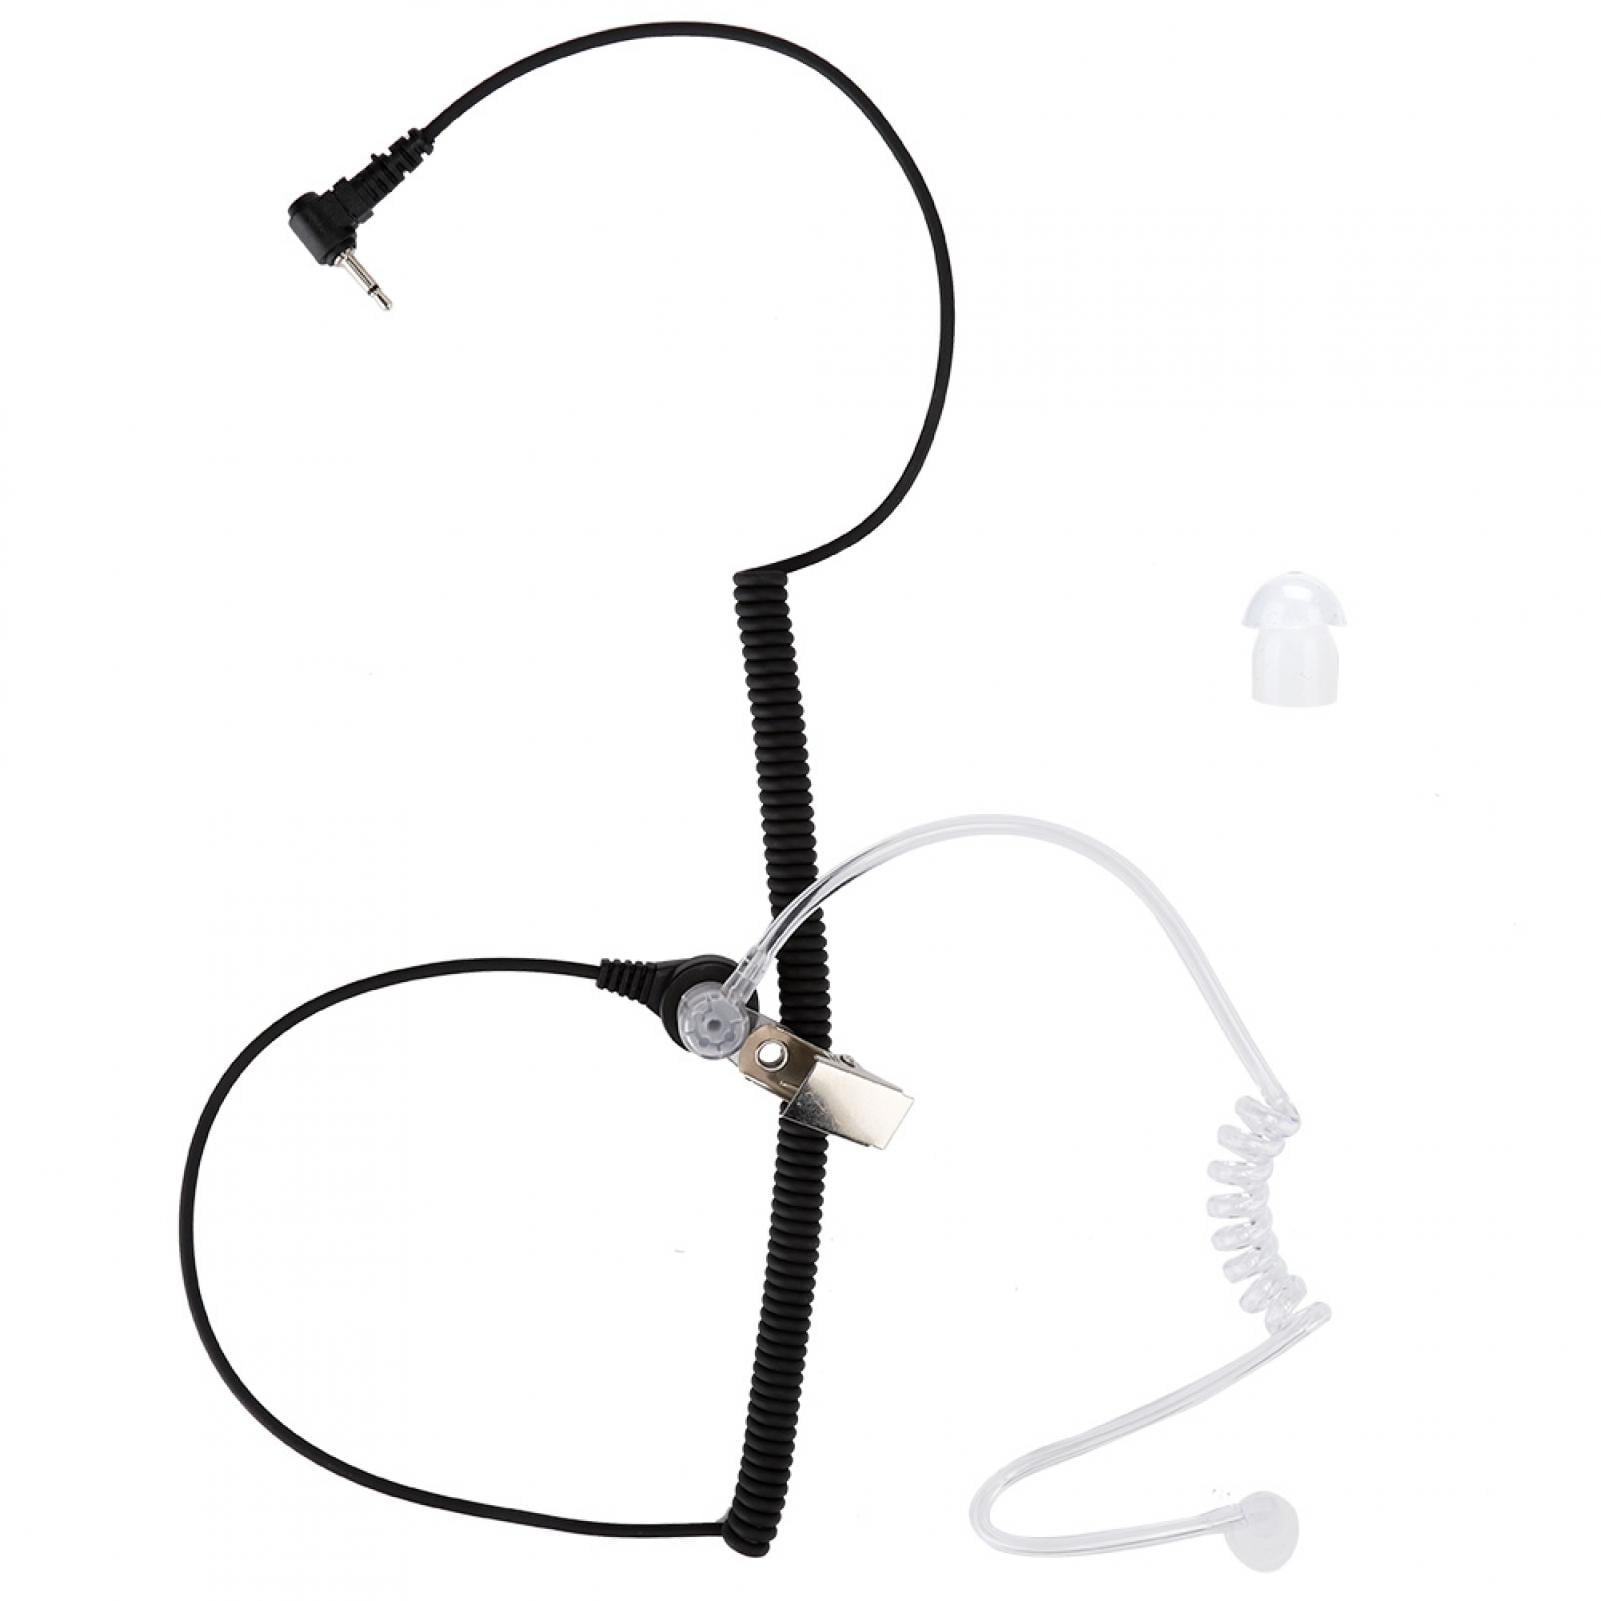 Listen Receive Only Acoustic Clear Air Tube Headset with 2.5 mm pin port jack 